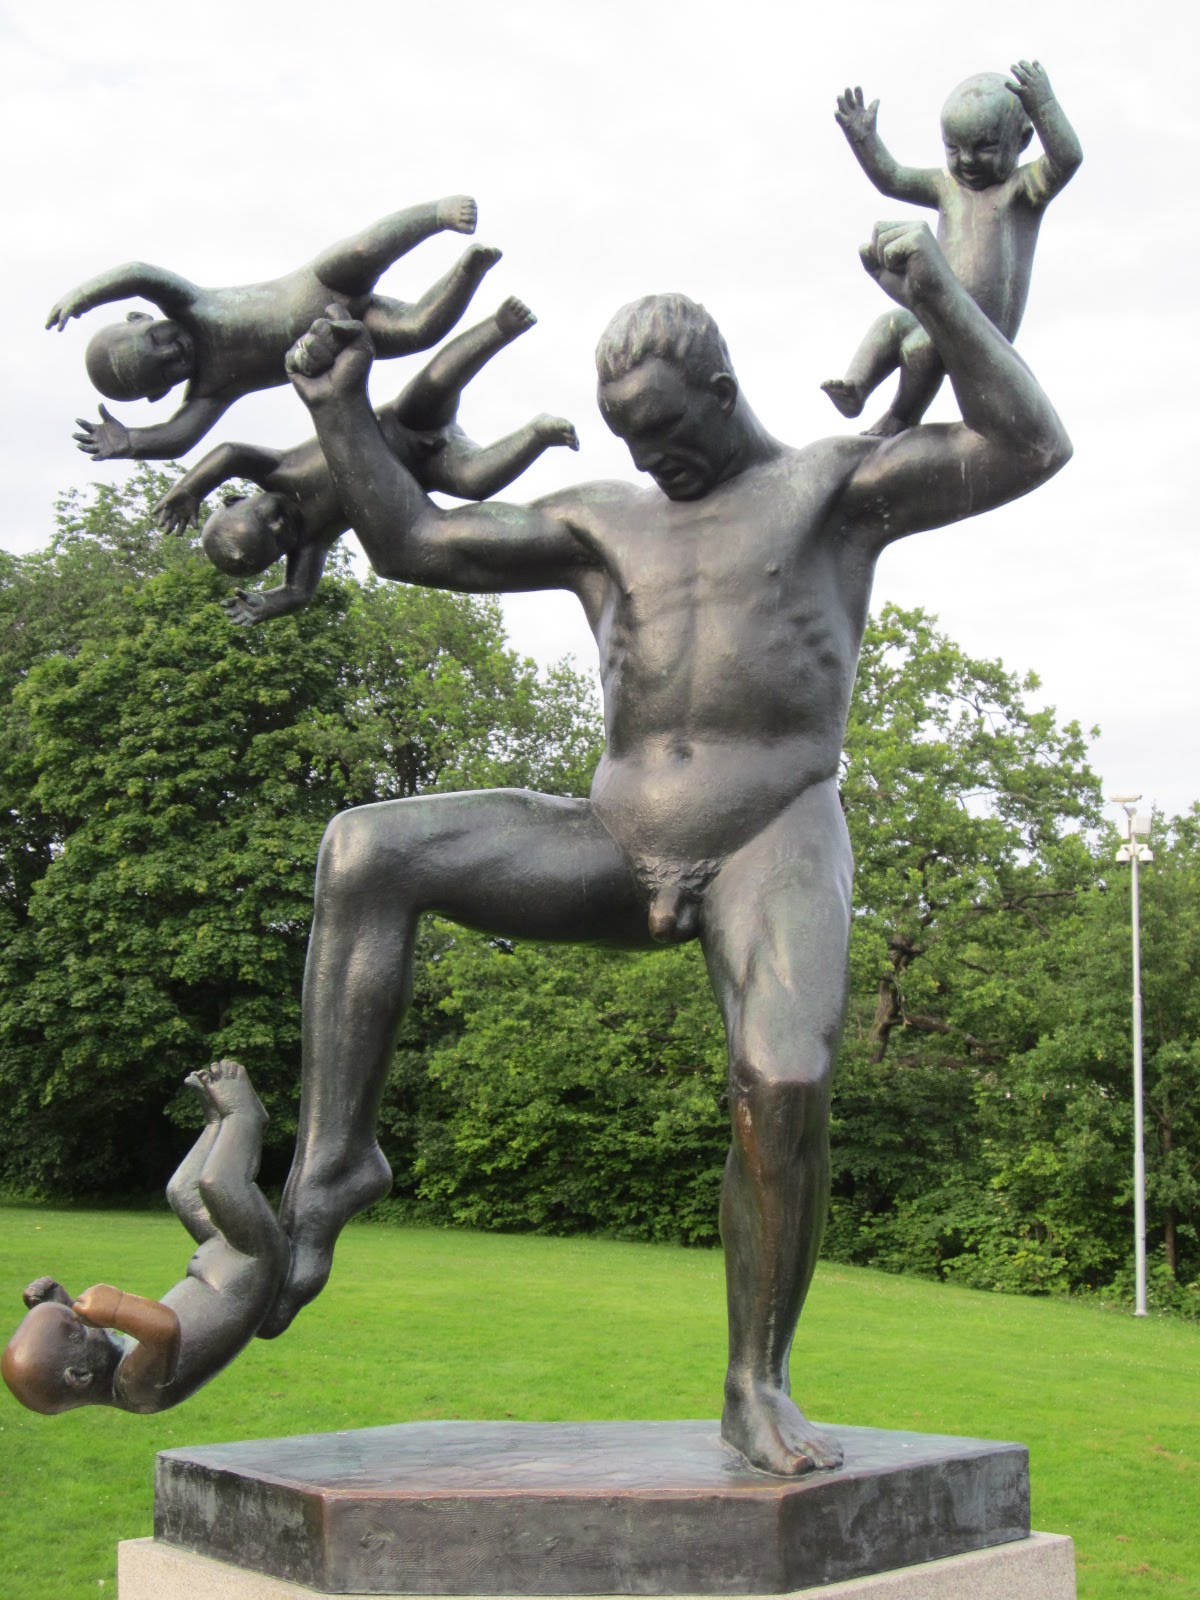 If statues came alive and attacked humans, which statue that you've ...